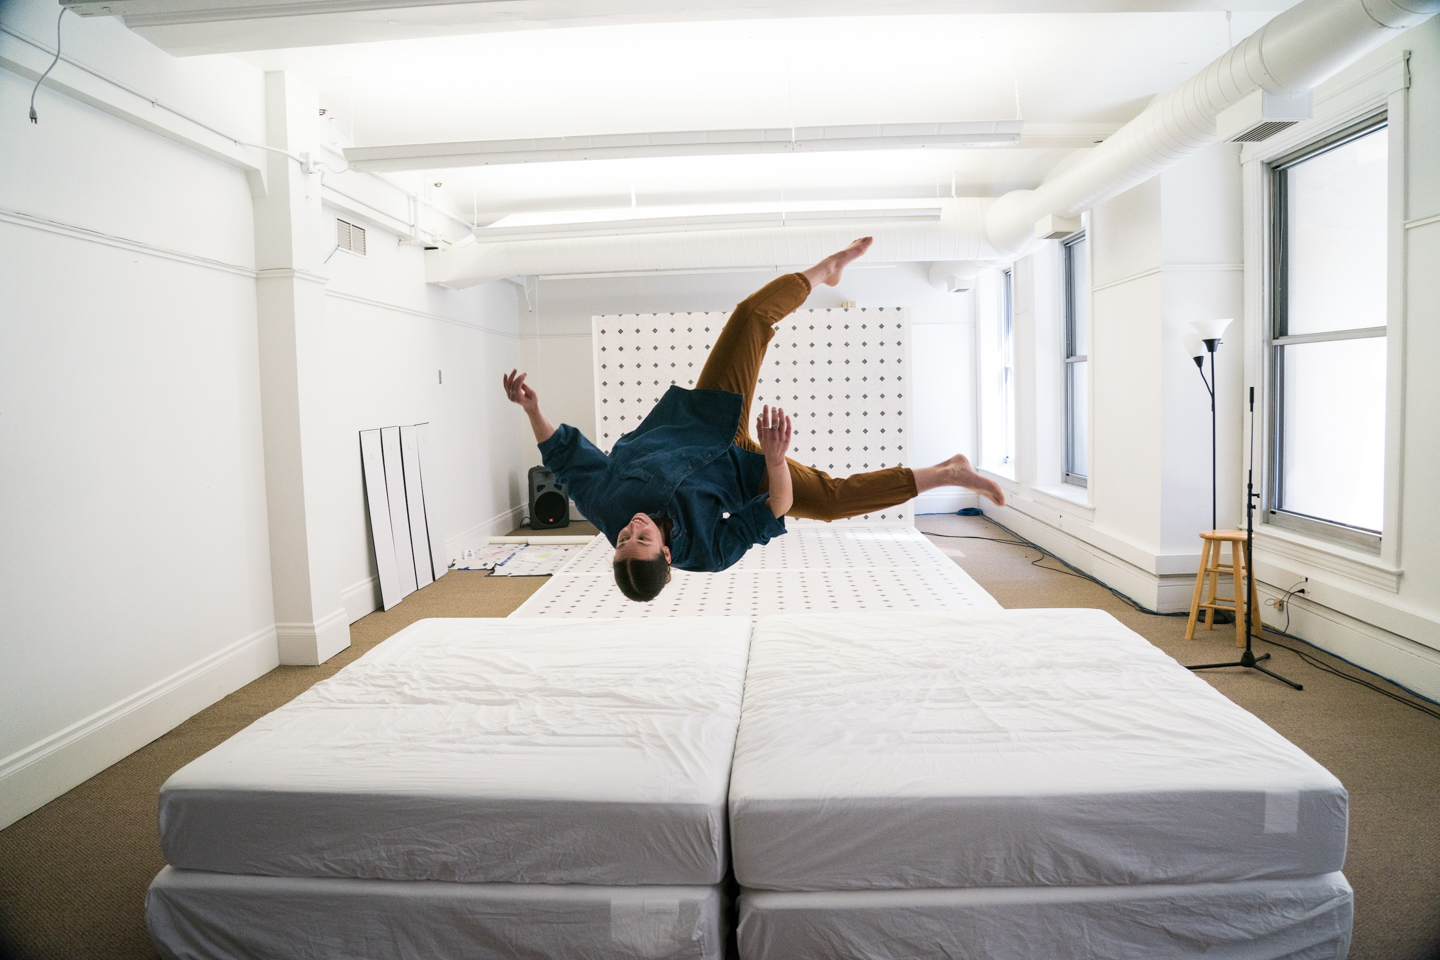 Person in blue shirt and brown pants falling backward in mid air over two white mattresses.